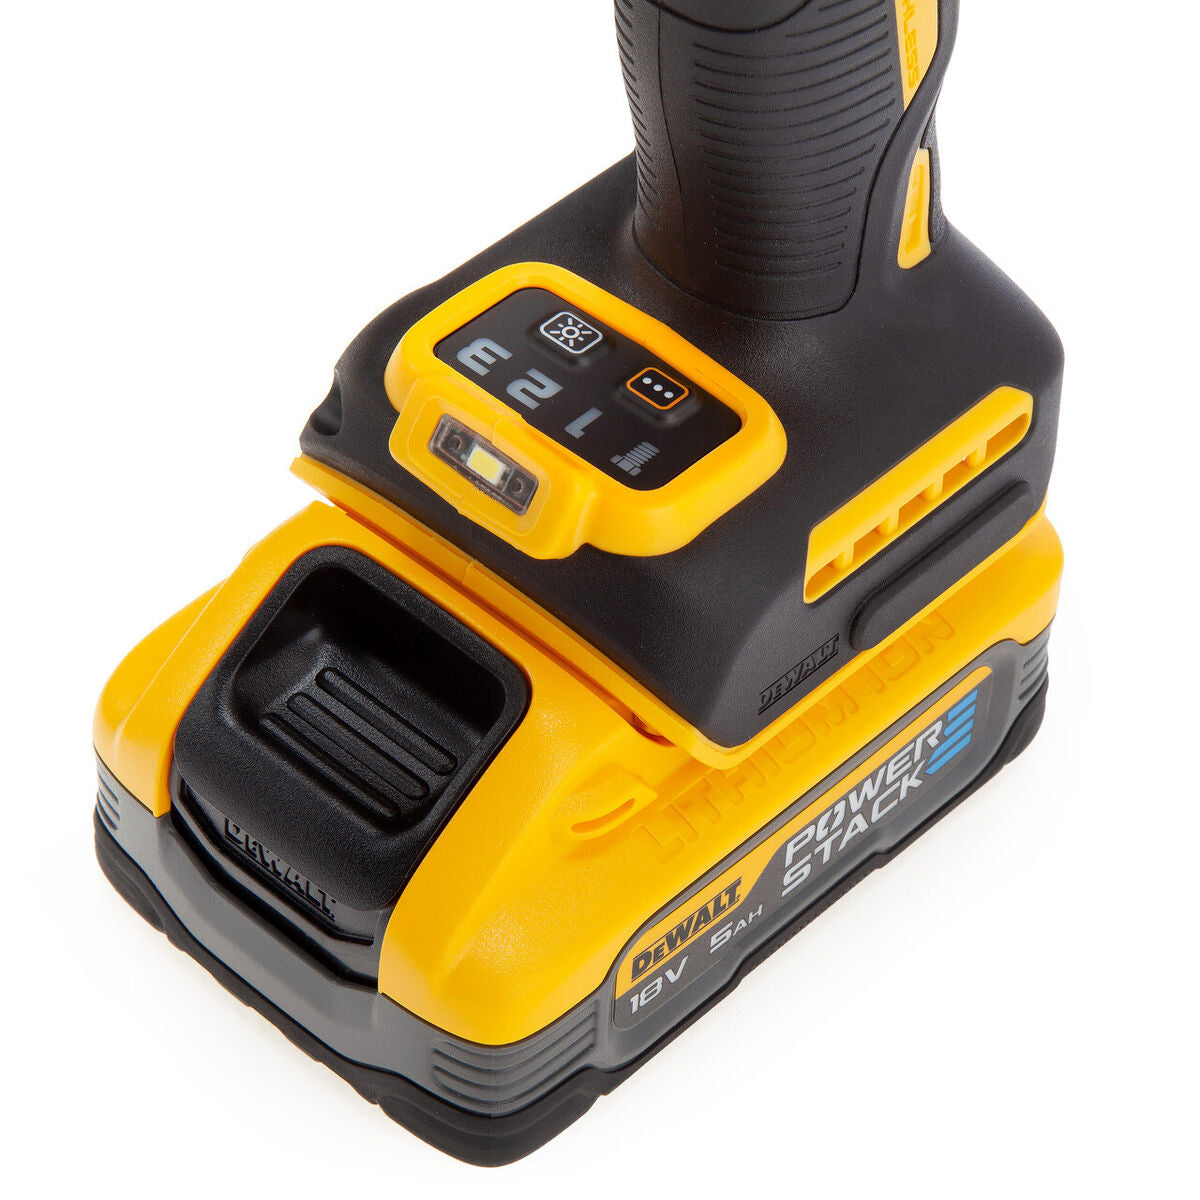 DeWalt DCF900H2T-GB 18V XR Brushless 1/2” Impact Wrench with 2 x 5.0Ah Batteries & Charger